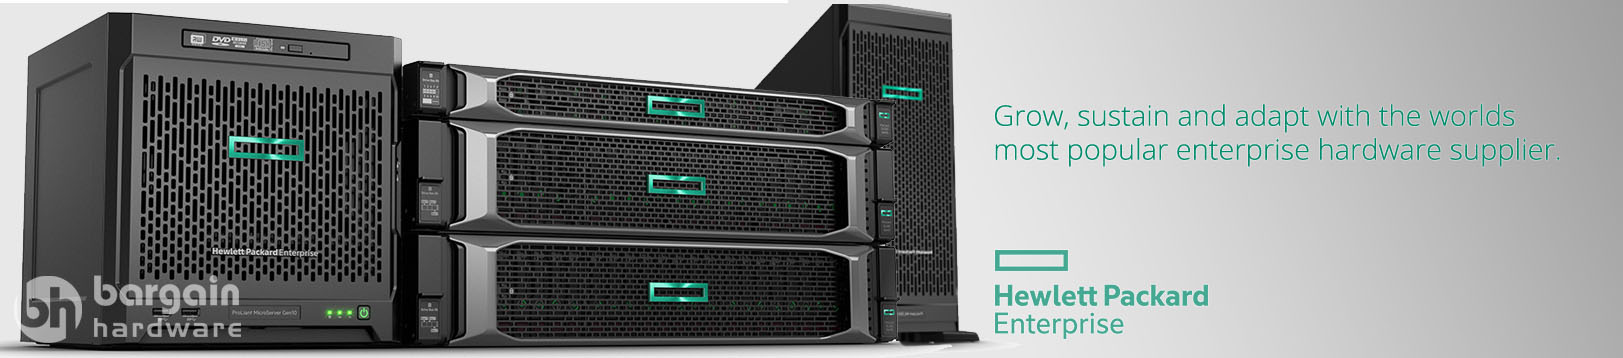 HPE Helping Businesses Grow